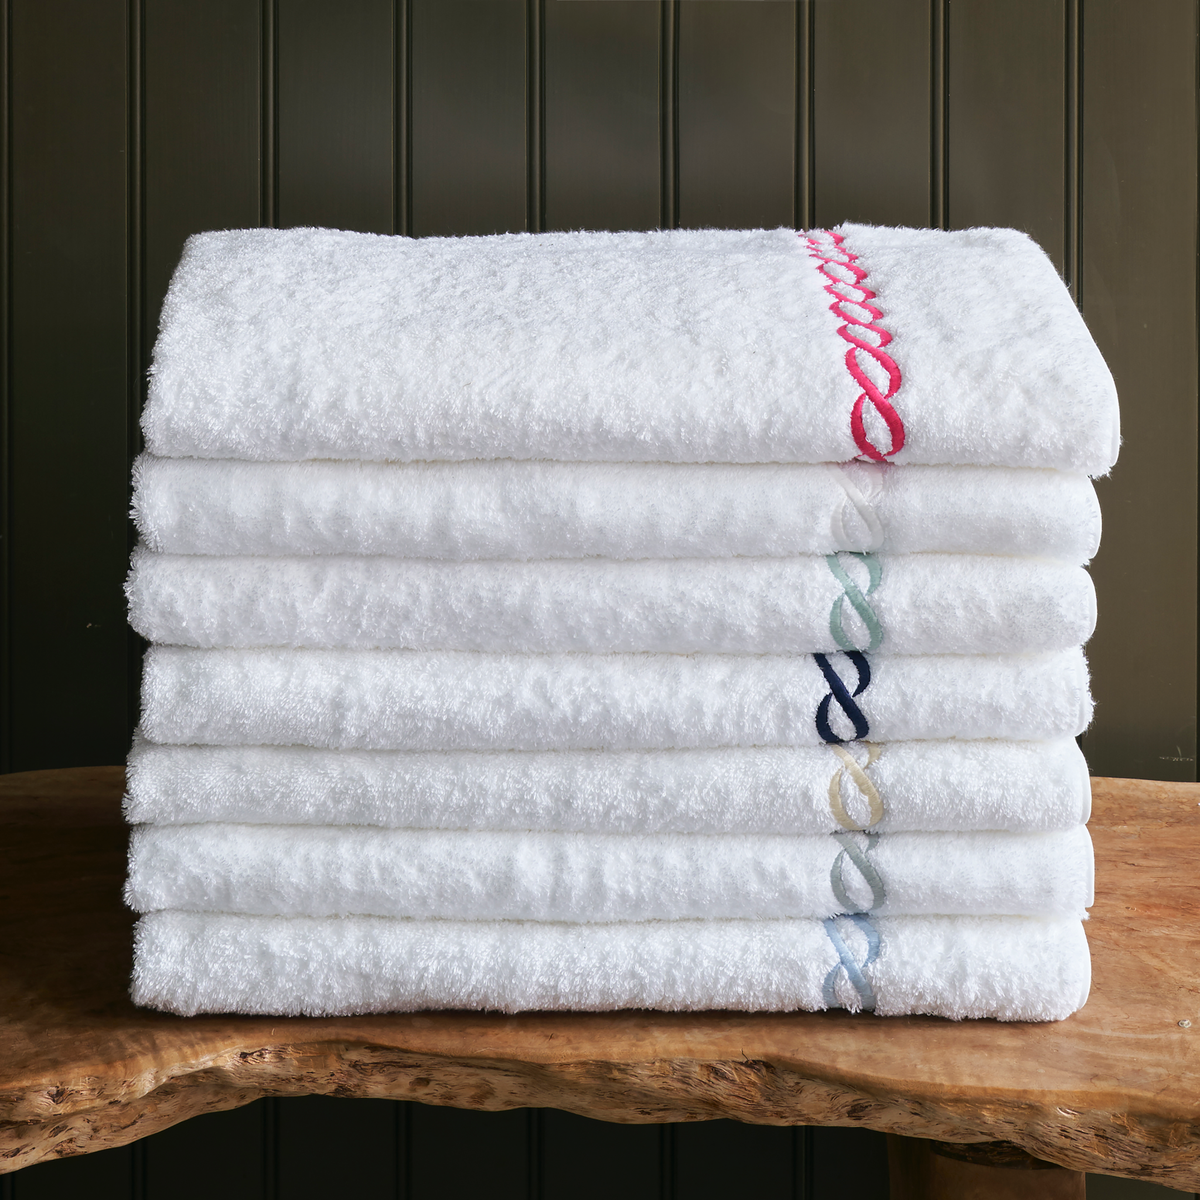 Stack of All Colors of Matouk Classic Chain Bath Towels